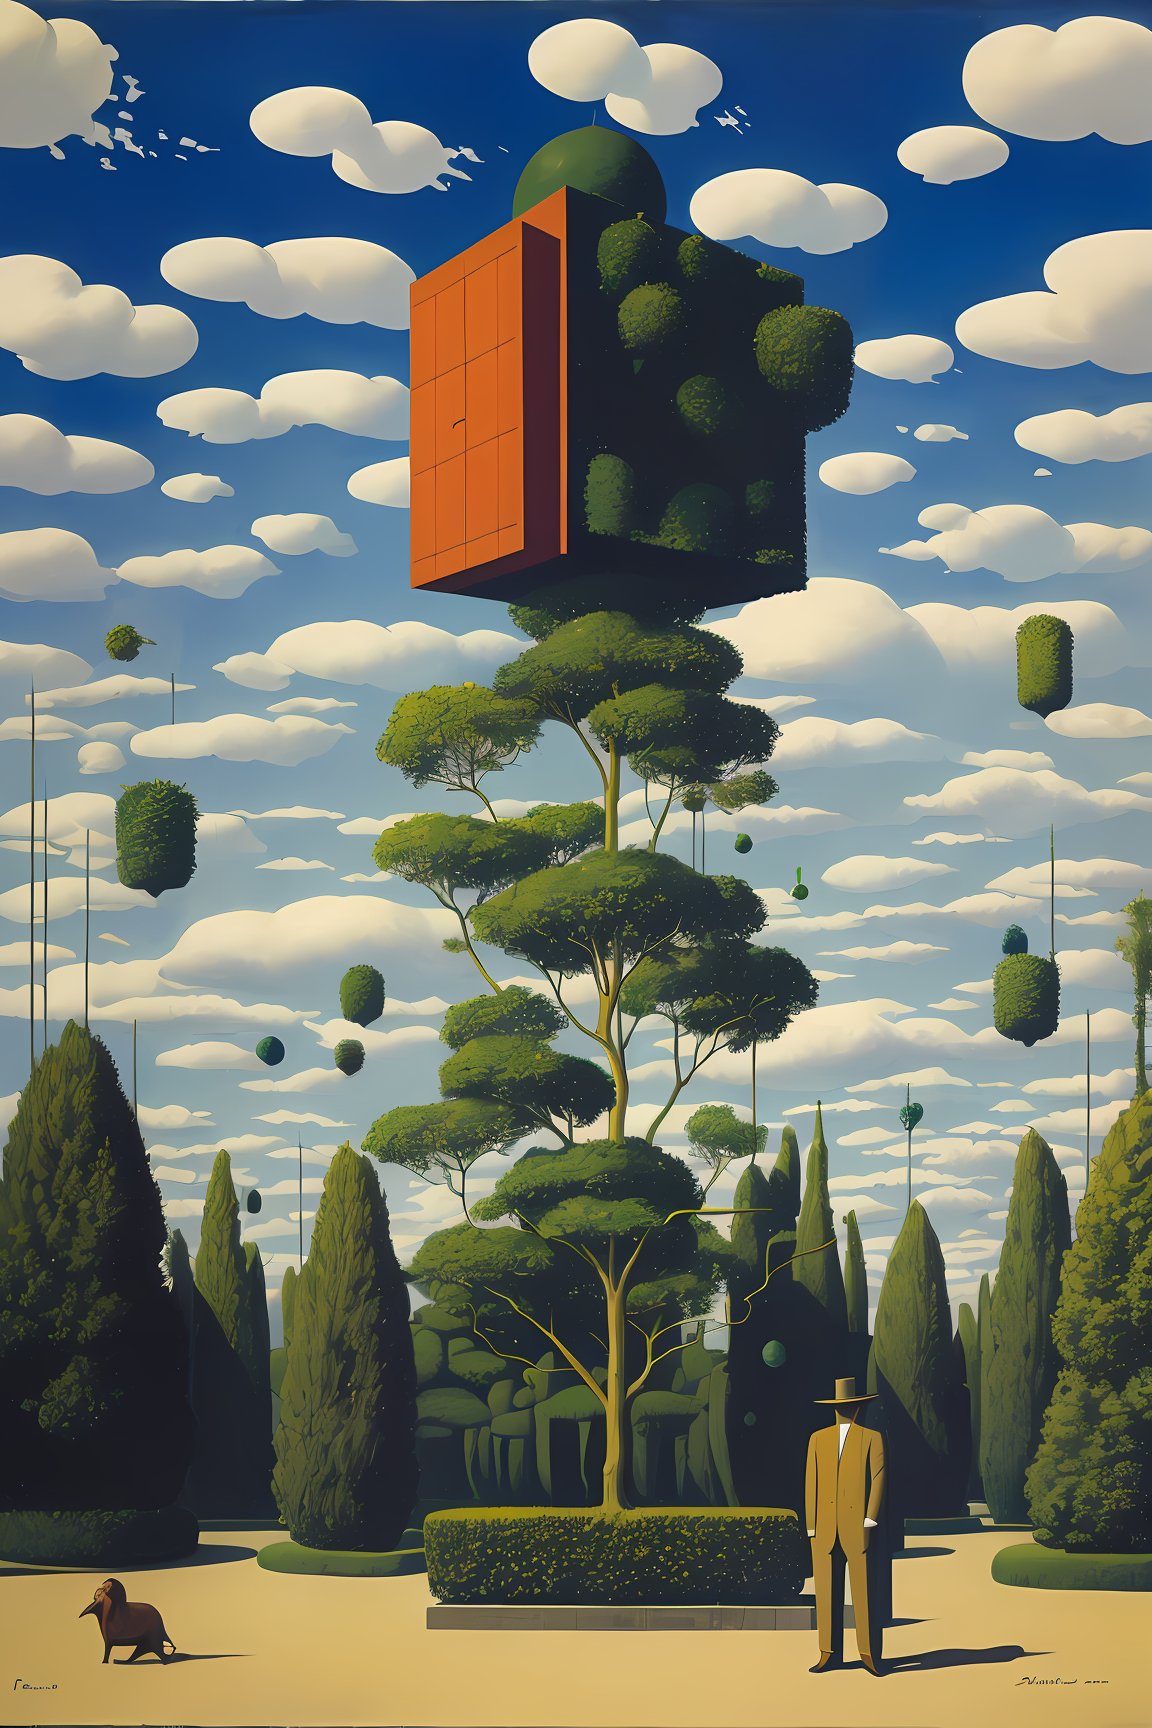 a surreal world inspired by rené magritte and salvador dali